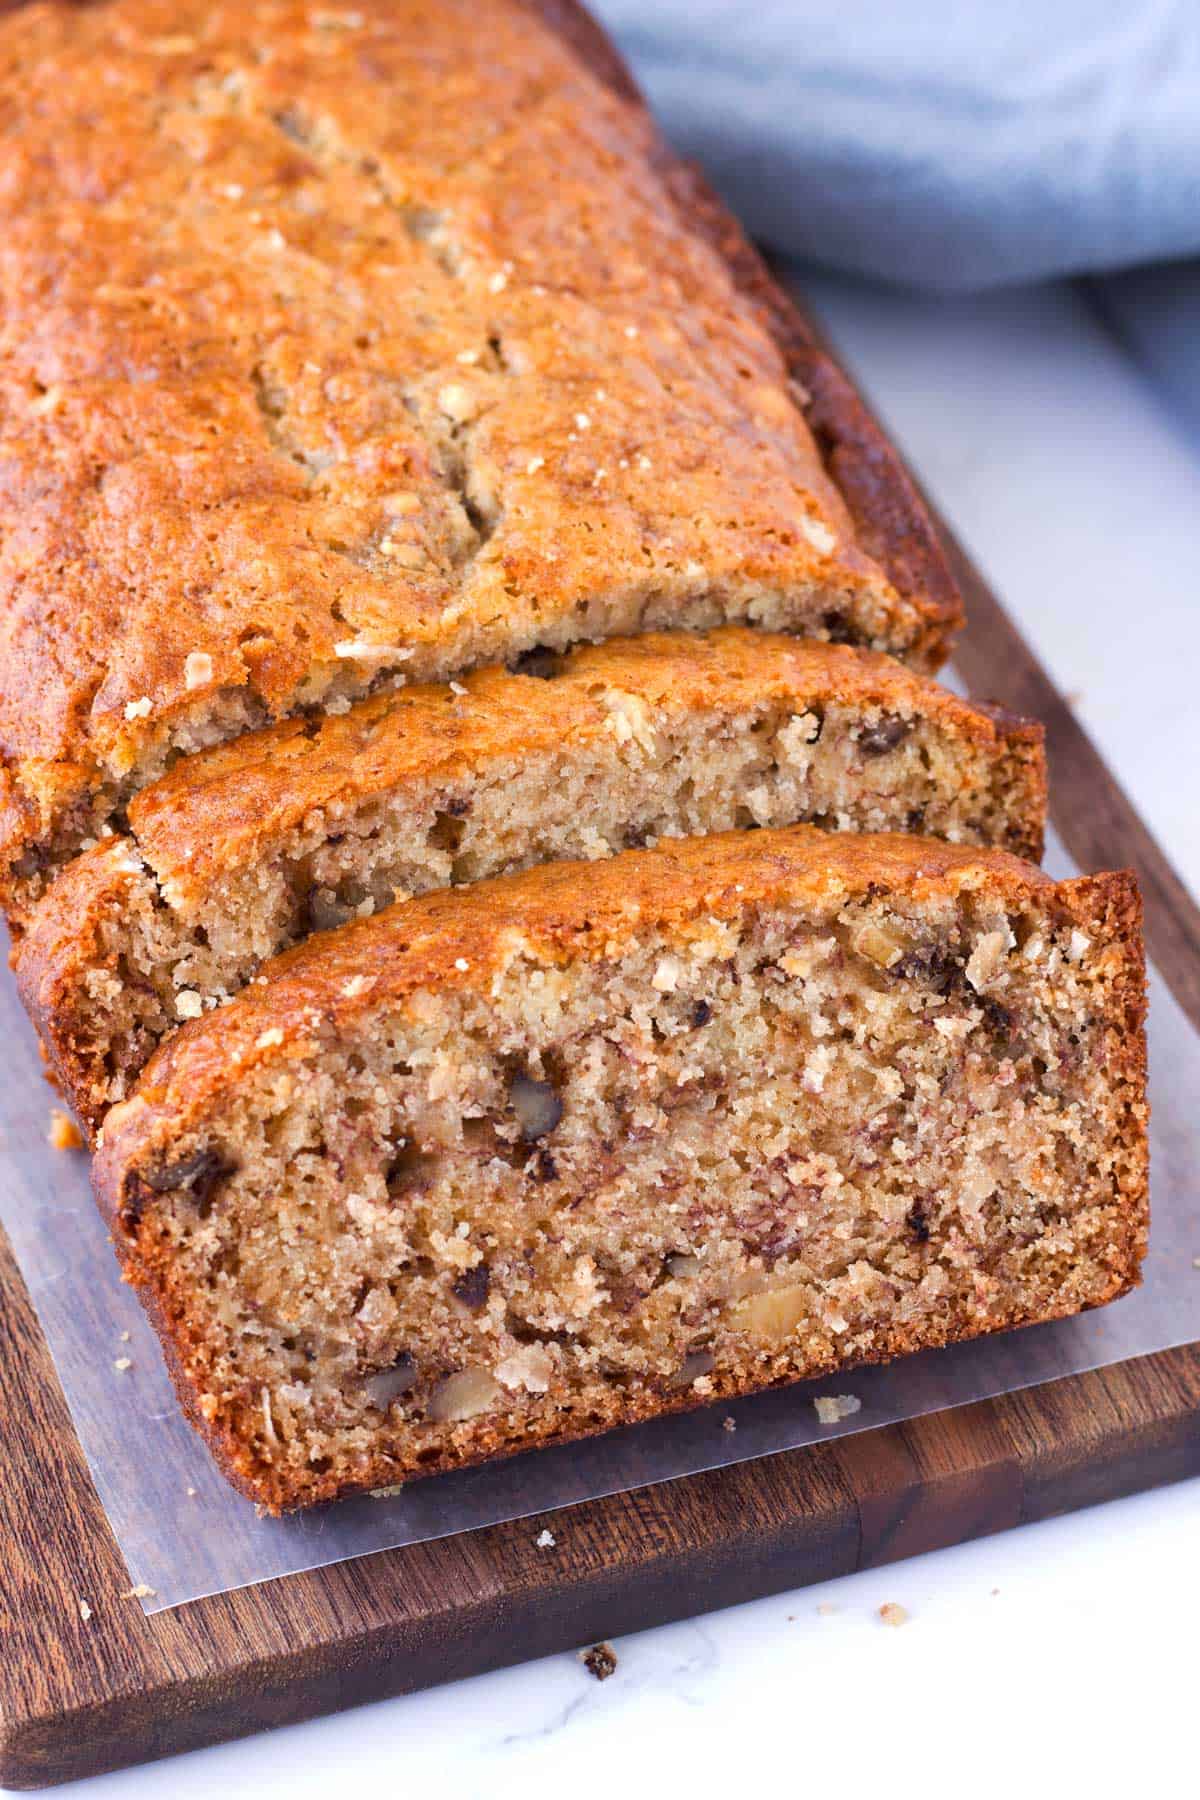 Golden brown crust on banana bread loaf with tender crumbs and walnuts.